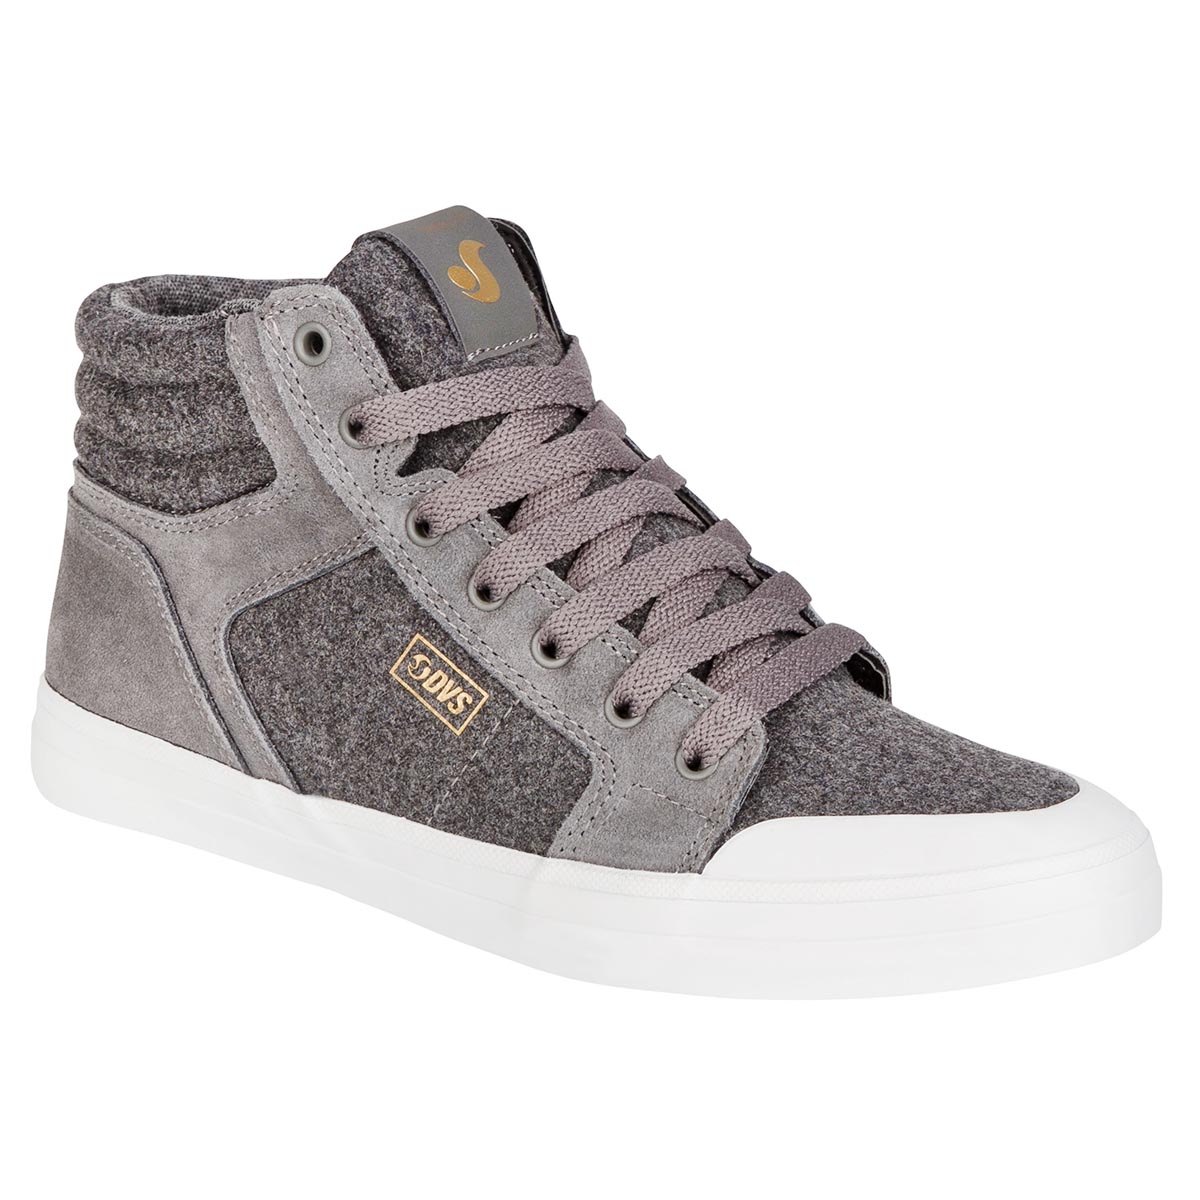 DVS Femme Chaussures Equinox Charcoal Suede